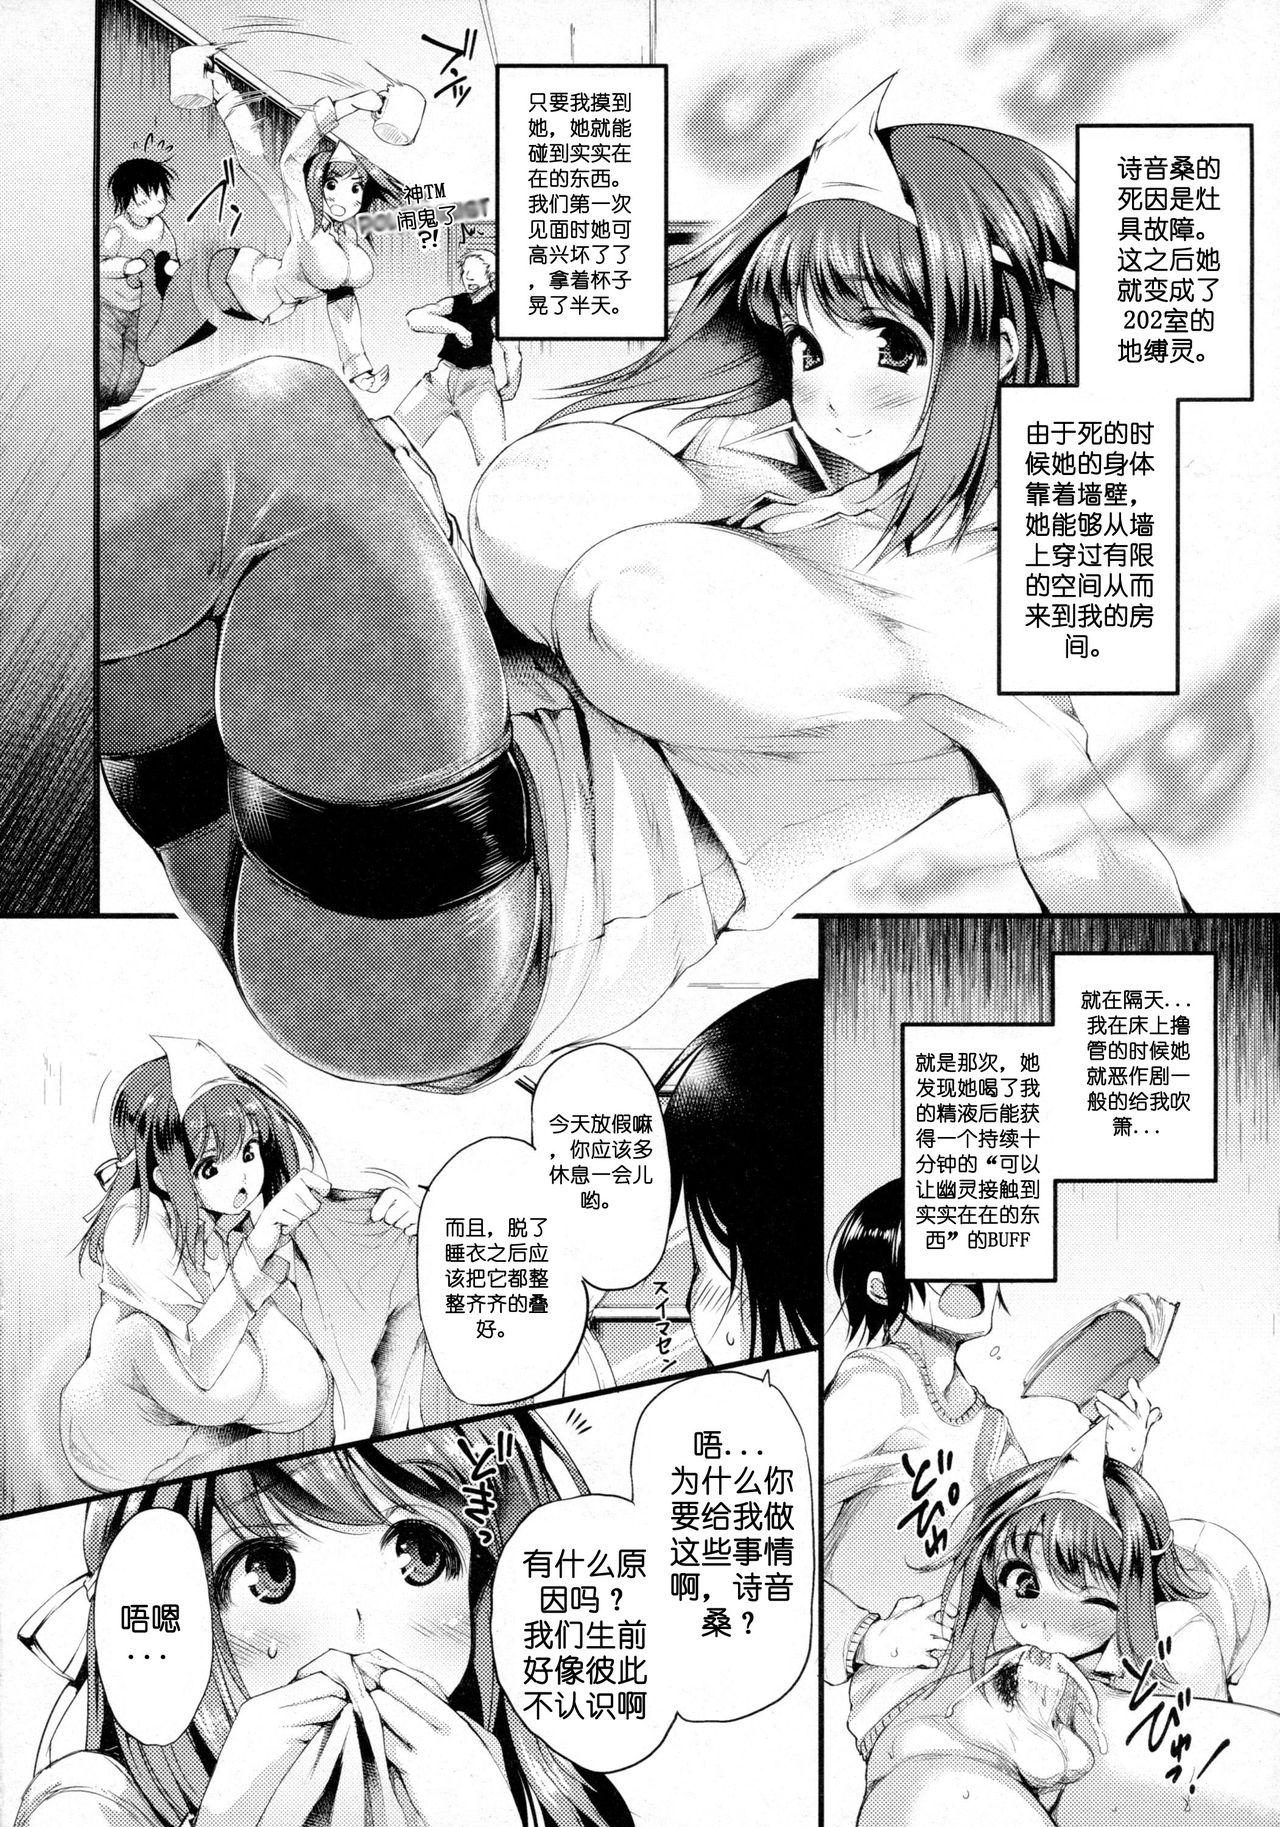 Busty [Oohira Sunset] 202-Goushitsu no Yuurei-san | The Ghost in Room 202 (COMIC Unreal 2016-02 Vol. 59) [Chinese] [简称天子个人汉化] (Ongoing) Sexy Girl - Page 2